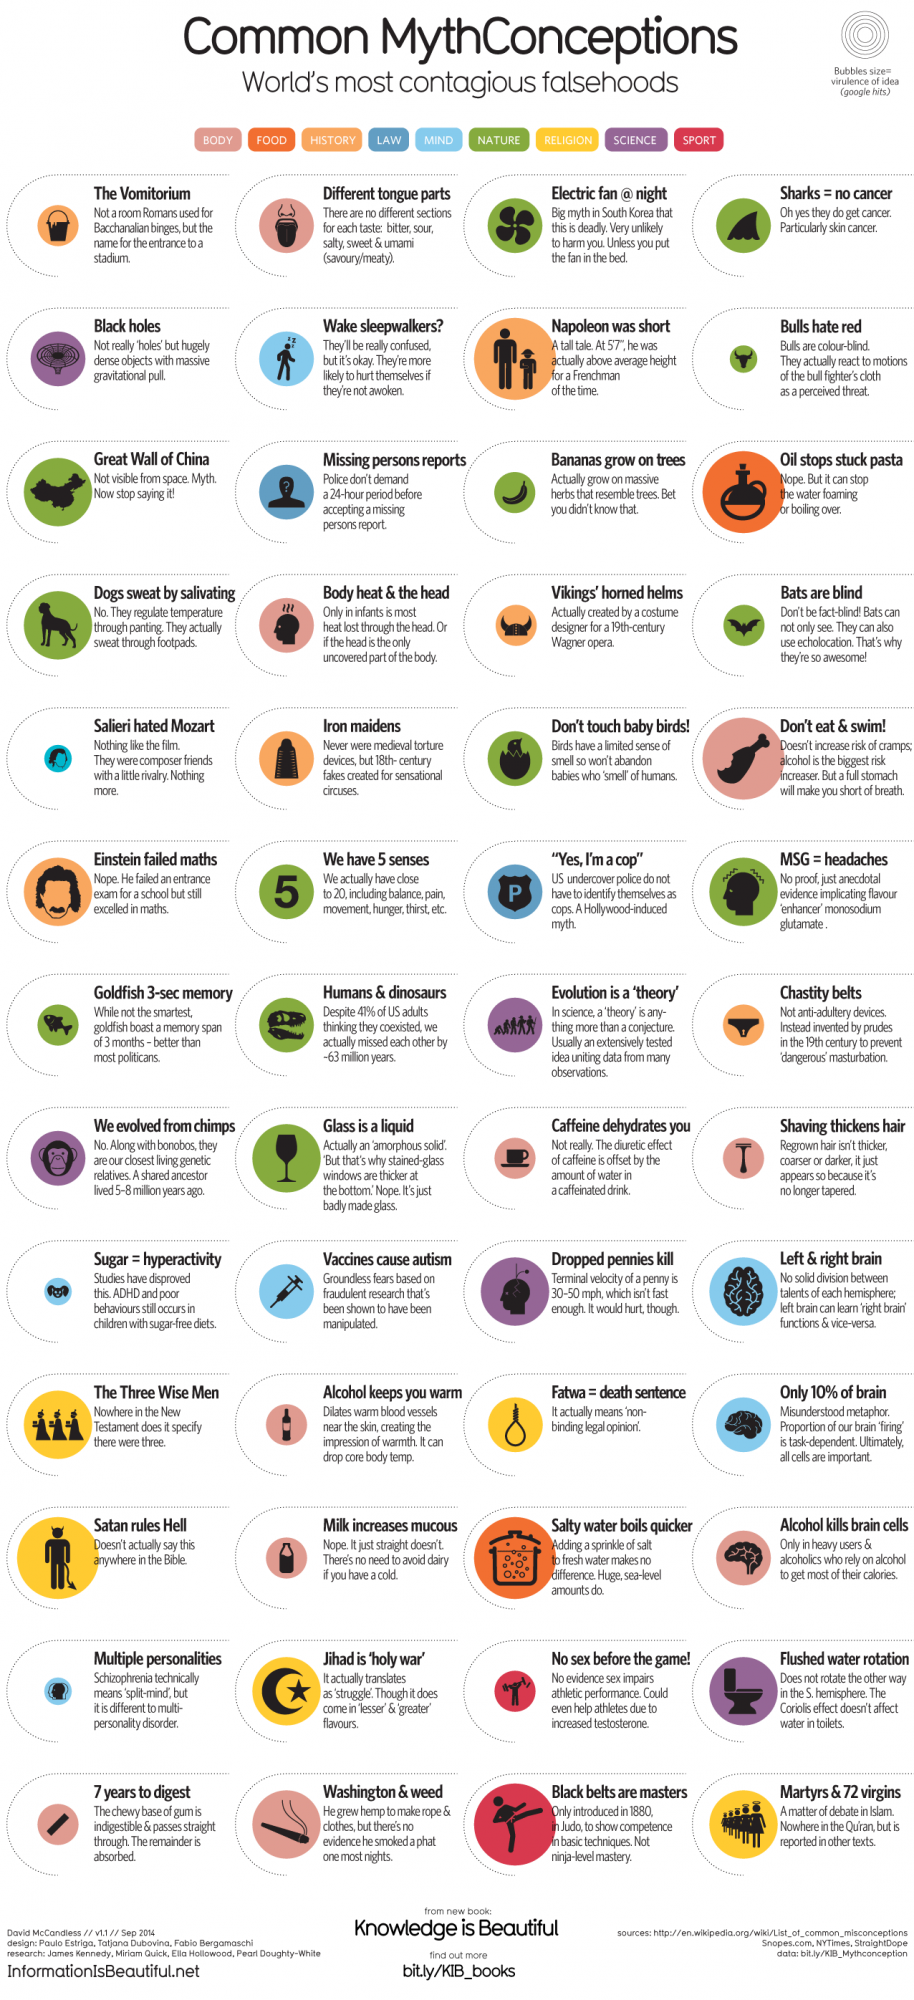 1276_Common-Mythconceptions_Oct22nd1